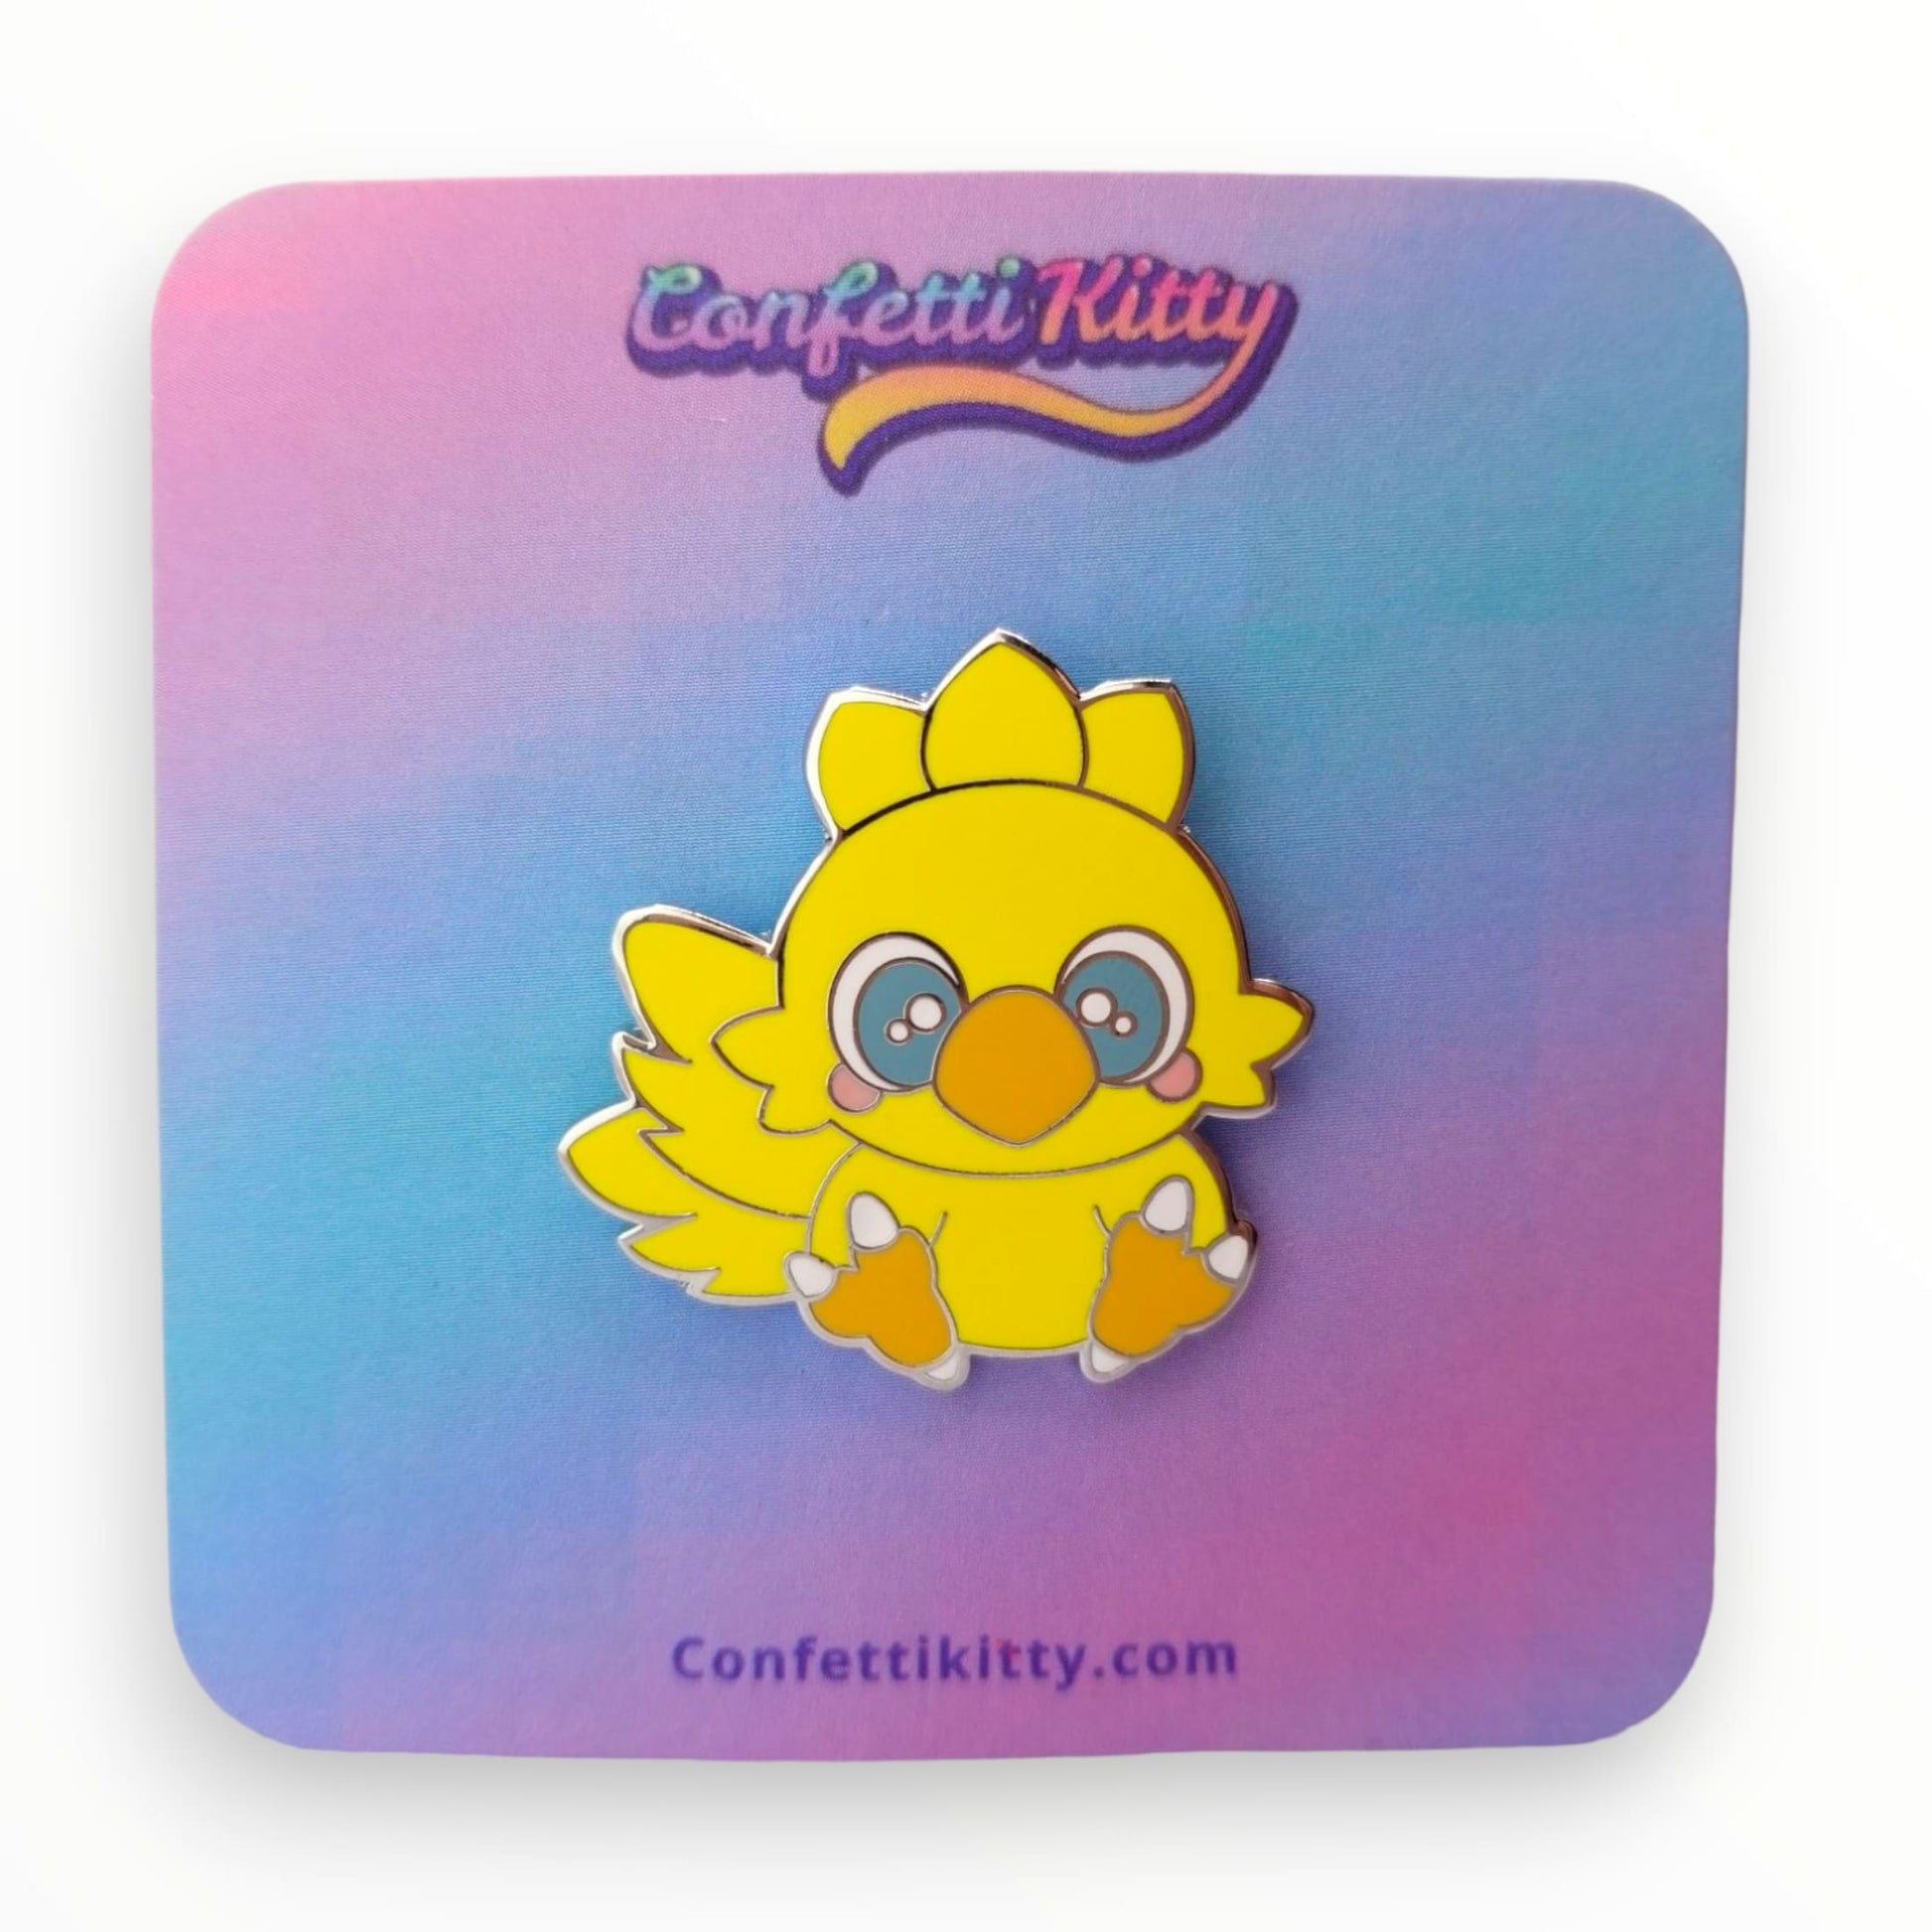 Final Fantasy Chocobo Enamel Pin from Confetti Kitty, Only 12.99